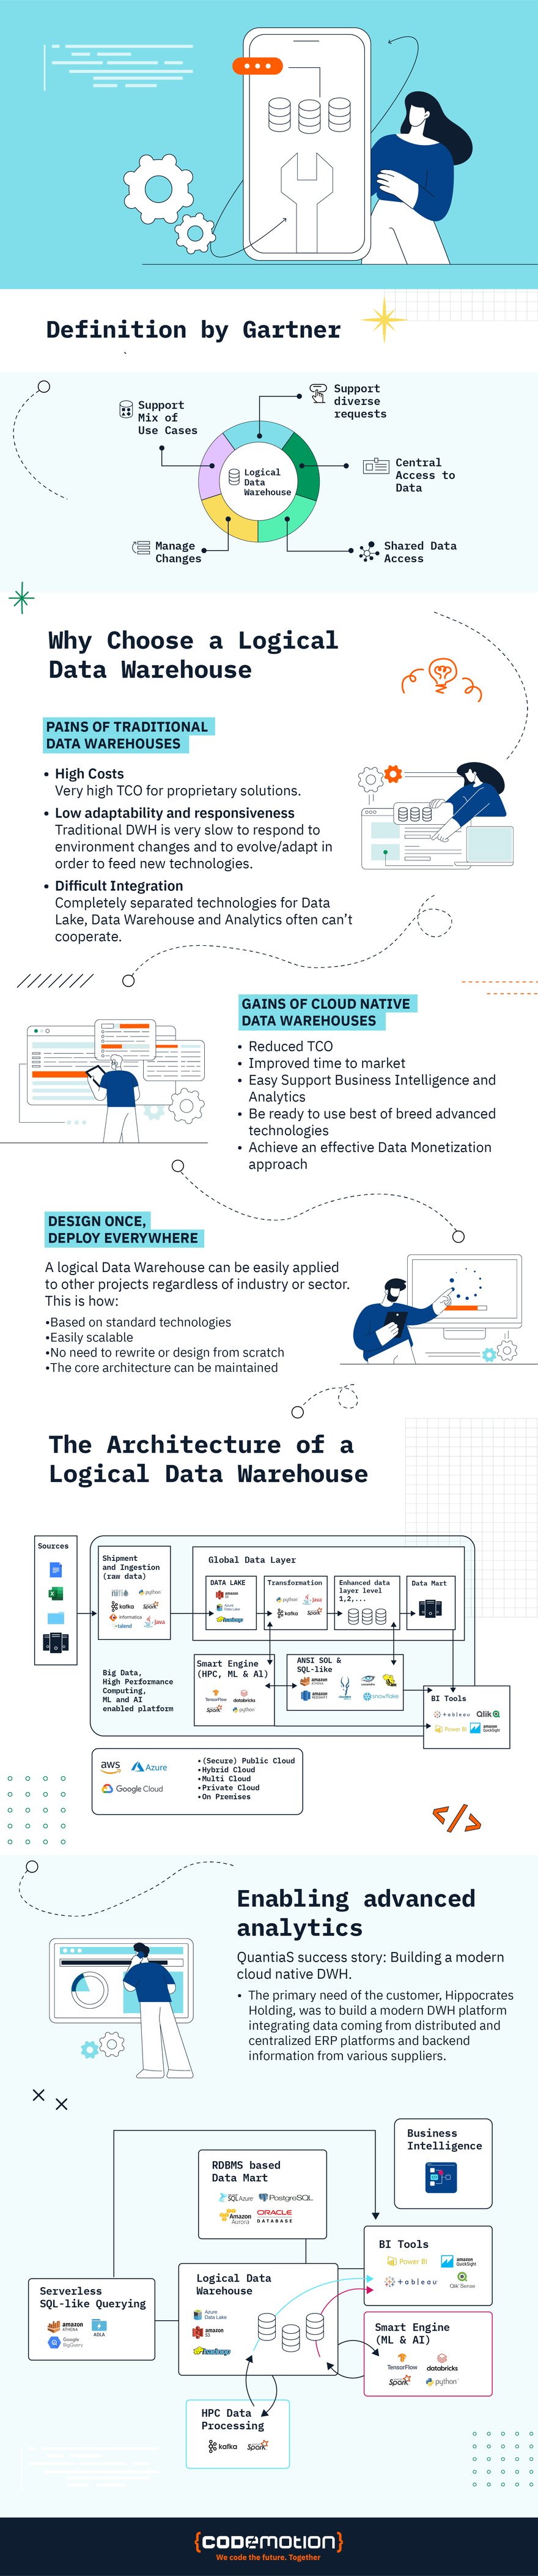 S2E Infographic Logical Data Warehouse for Hippocrates Holding!